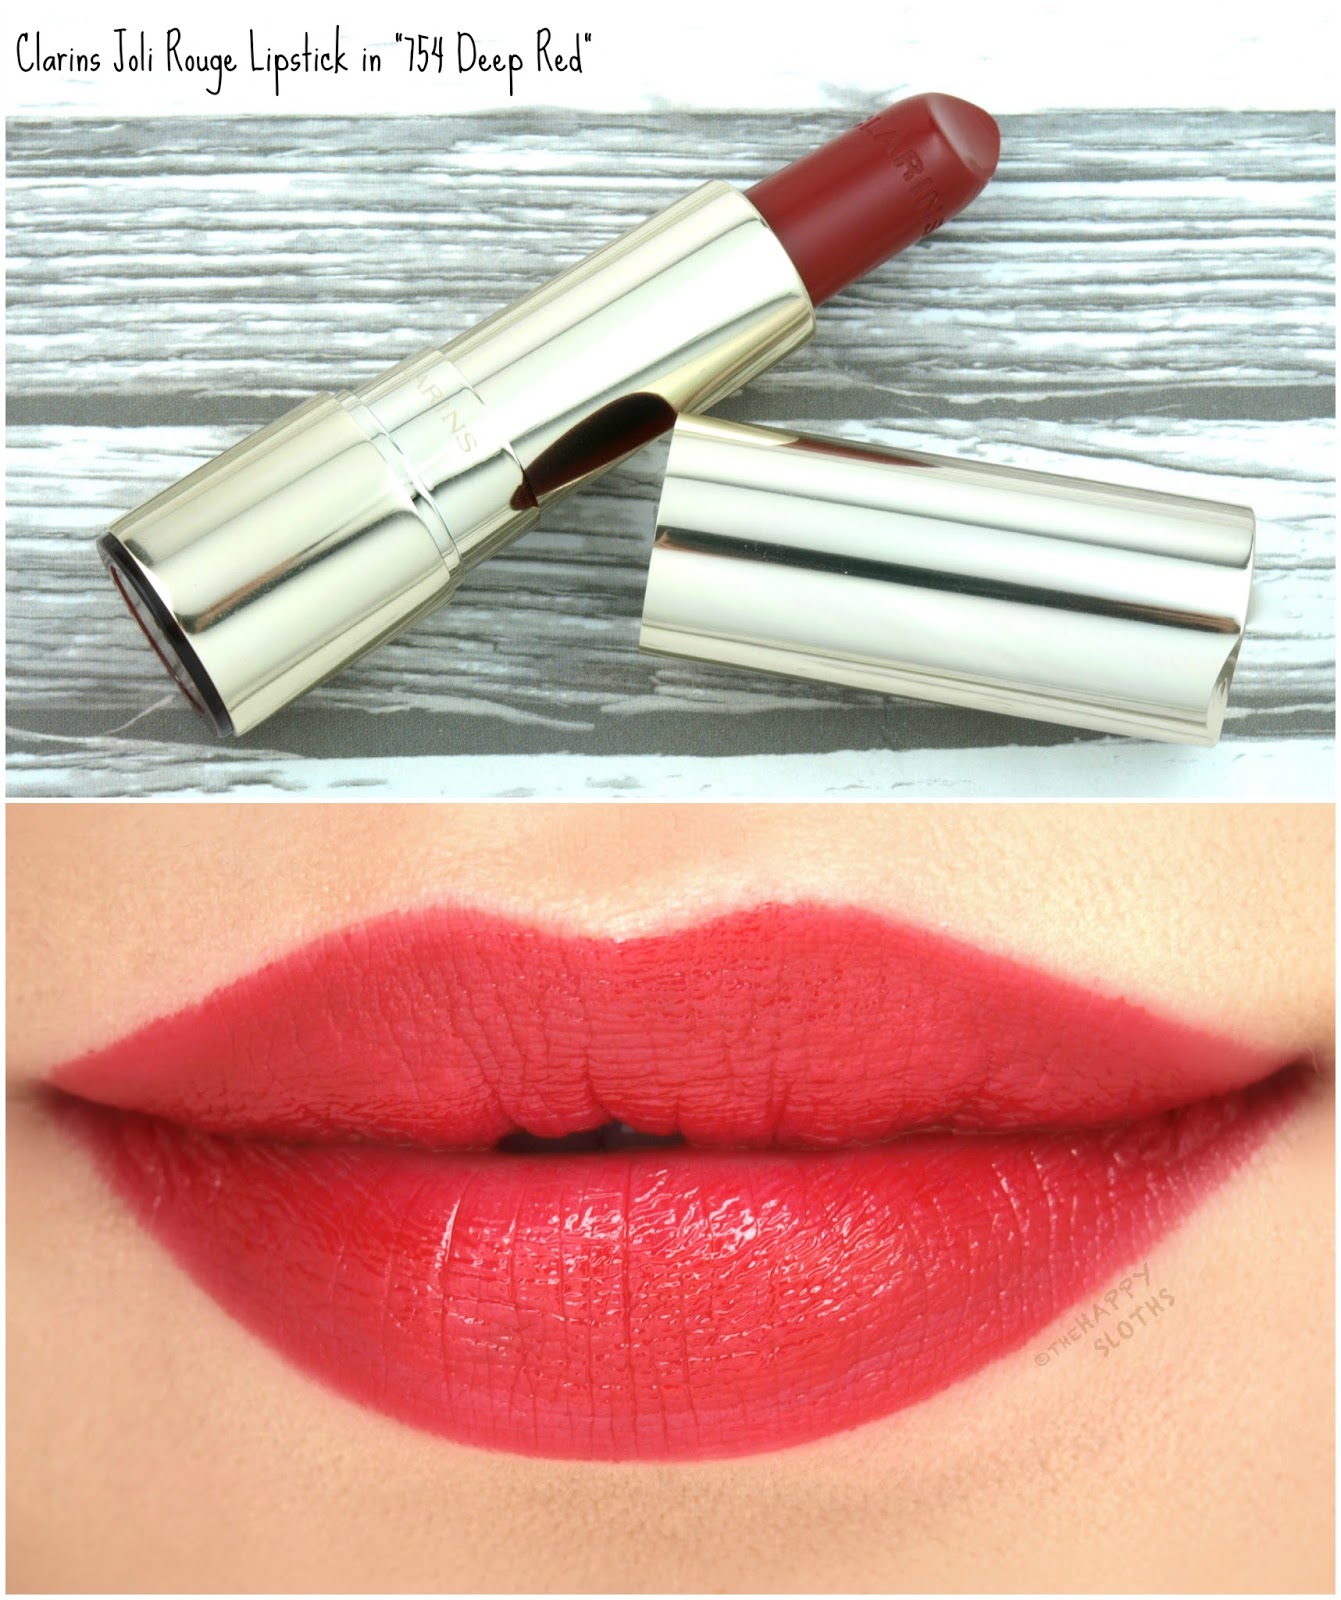 Clarins Fall 2017 | Joli Rouge Lipstick in "754 Deep Red": Review and Swatches